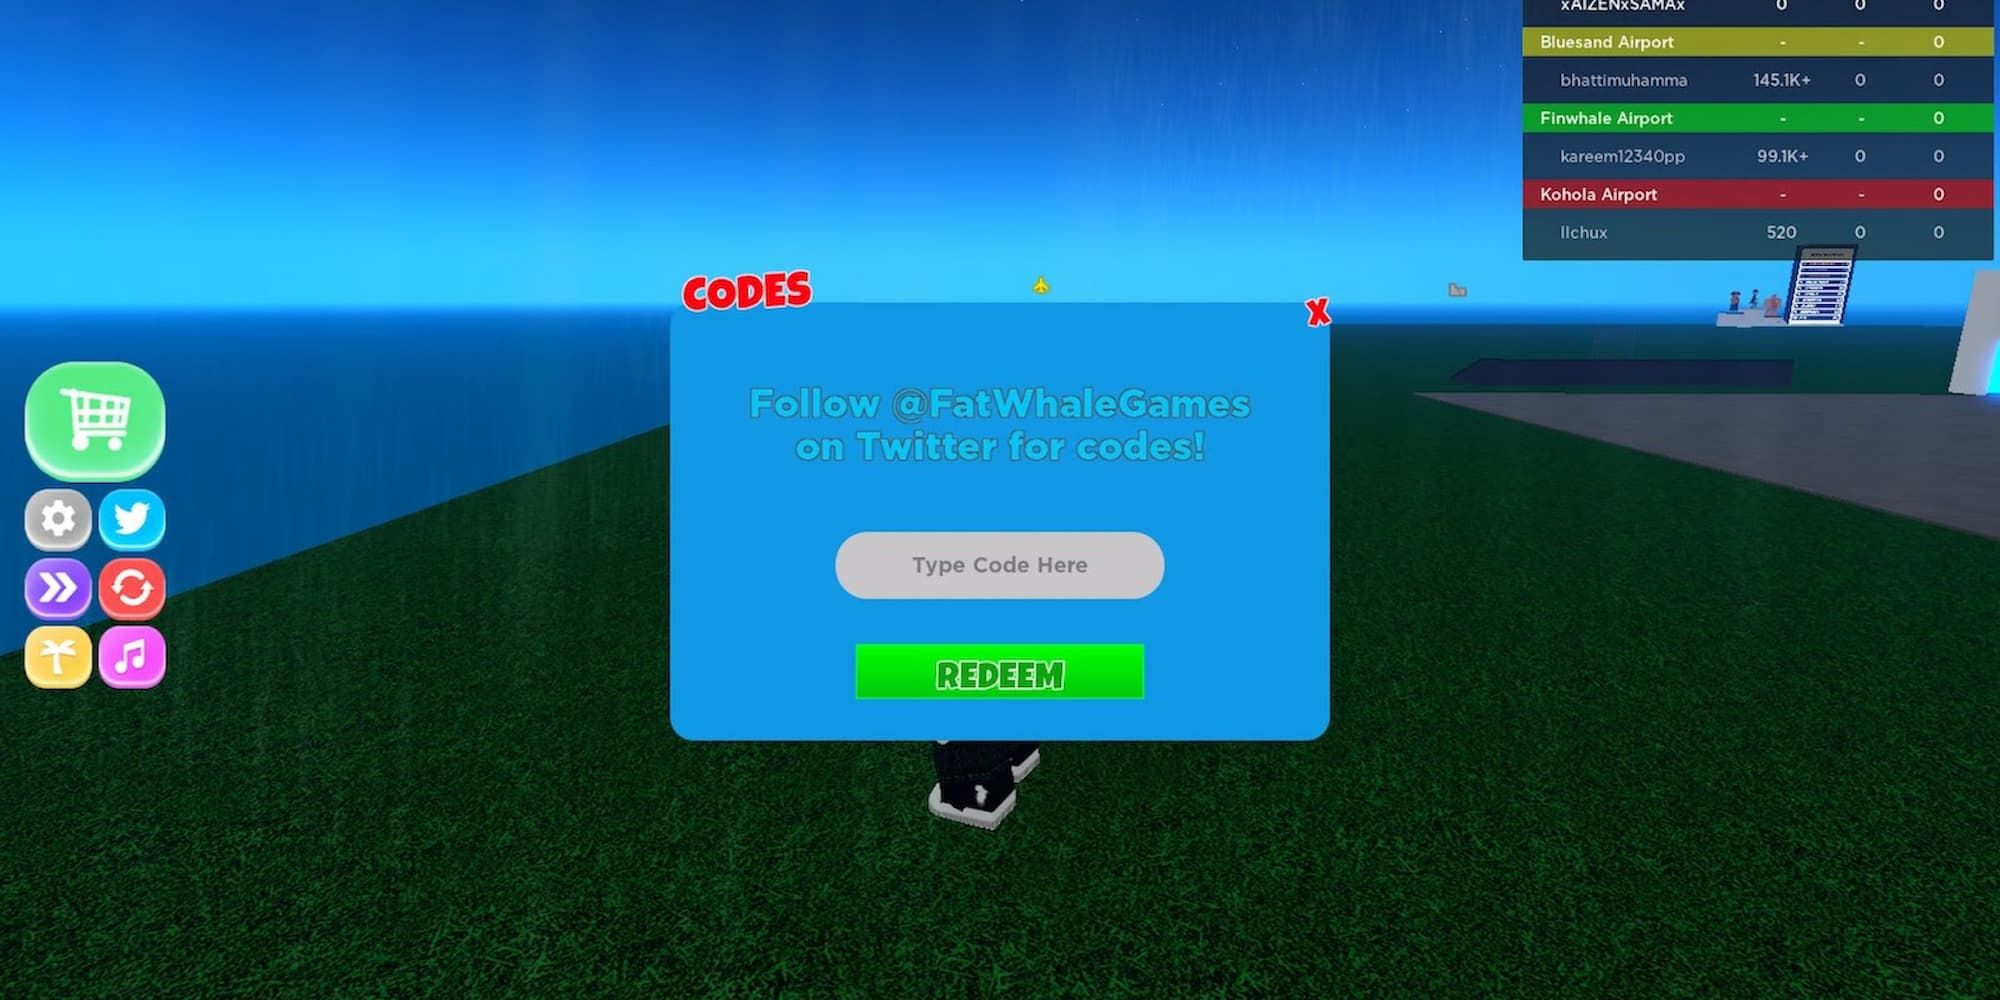 The place to redeem codes in Roblox Airport Tycoon